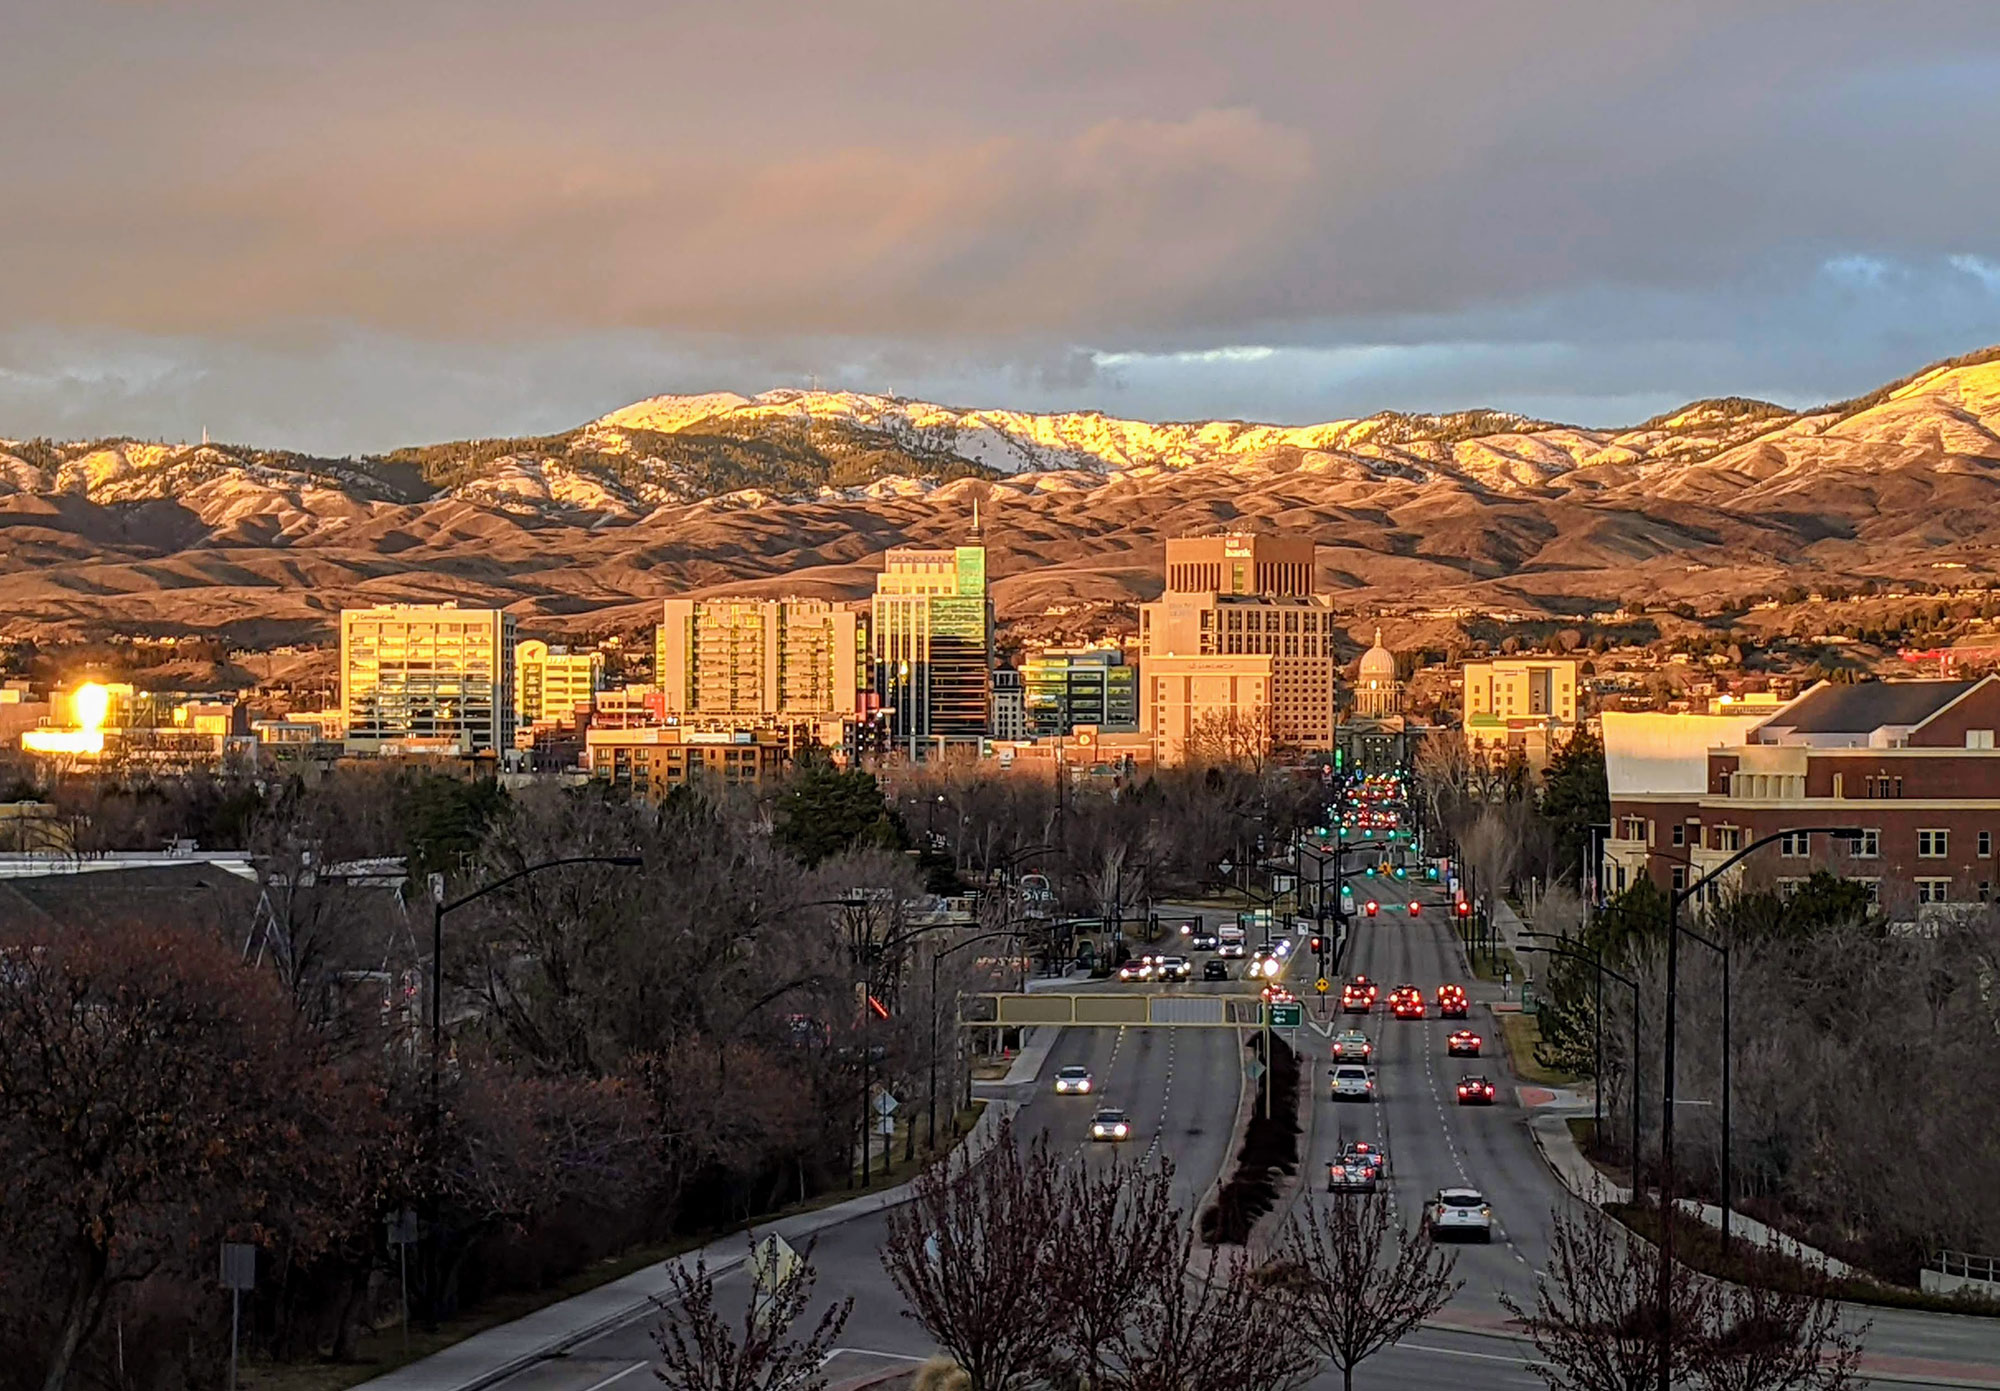 Photograph of Boise, Idaho, in 2021, possibly at sunset. The photo shows a city with short skyscrapers clustered in the mid-distance. Paved three-lane roads running to and from the city center can be seen in the foreground. In the background, snow-dusted rolling hills can be see. The sky is overcast.